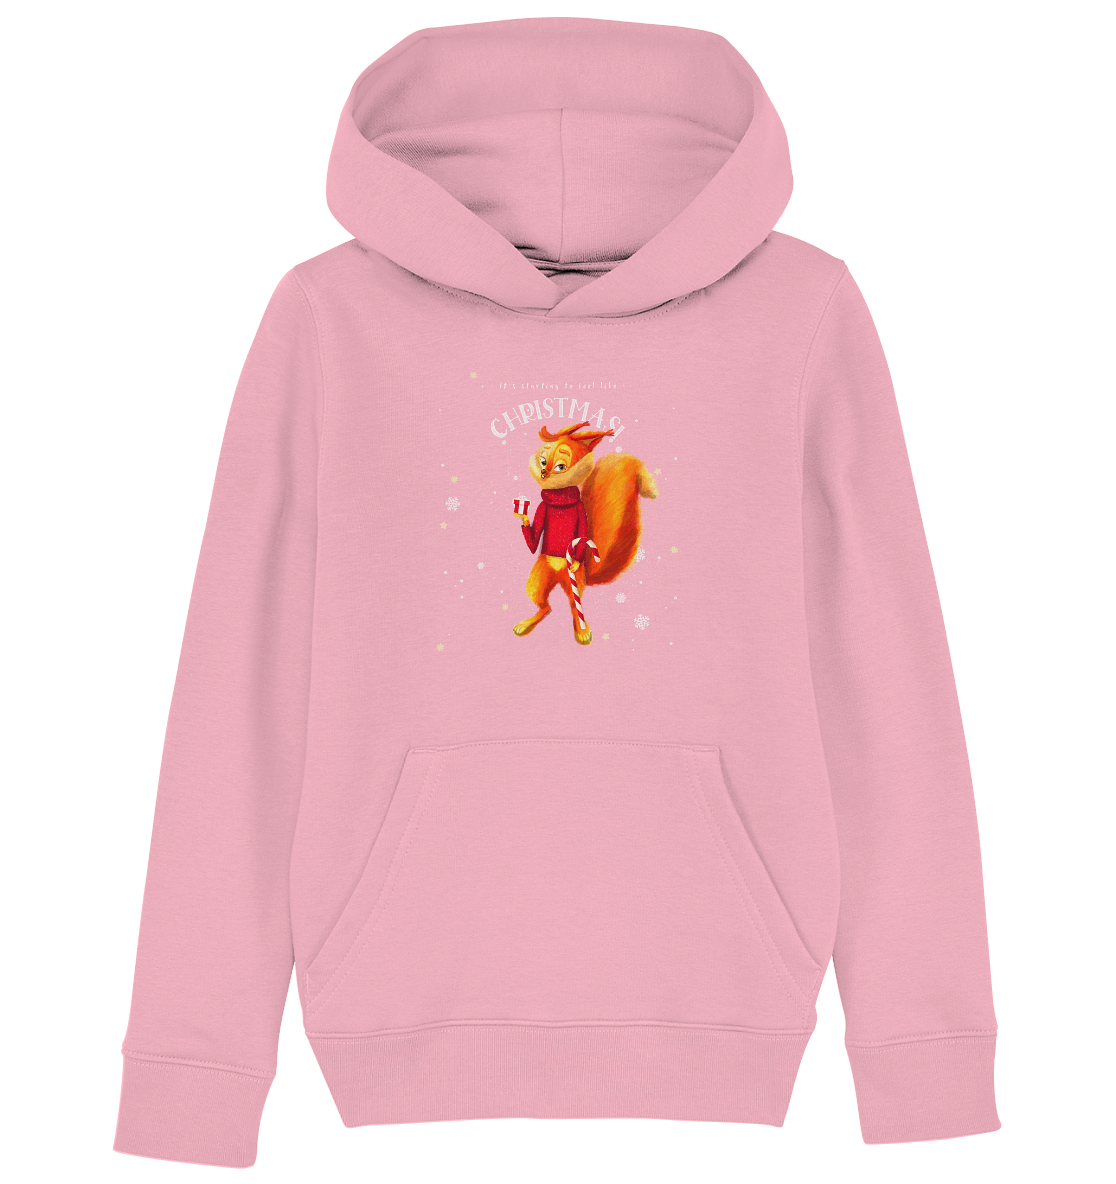 Eichhoernchen-Pullover-Christmas-Hoodie-Kinder-rosa